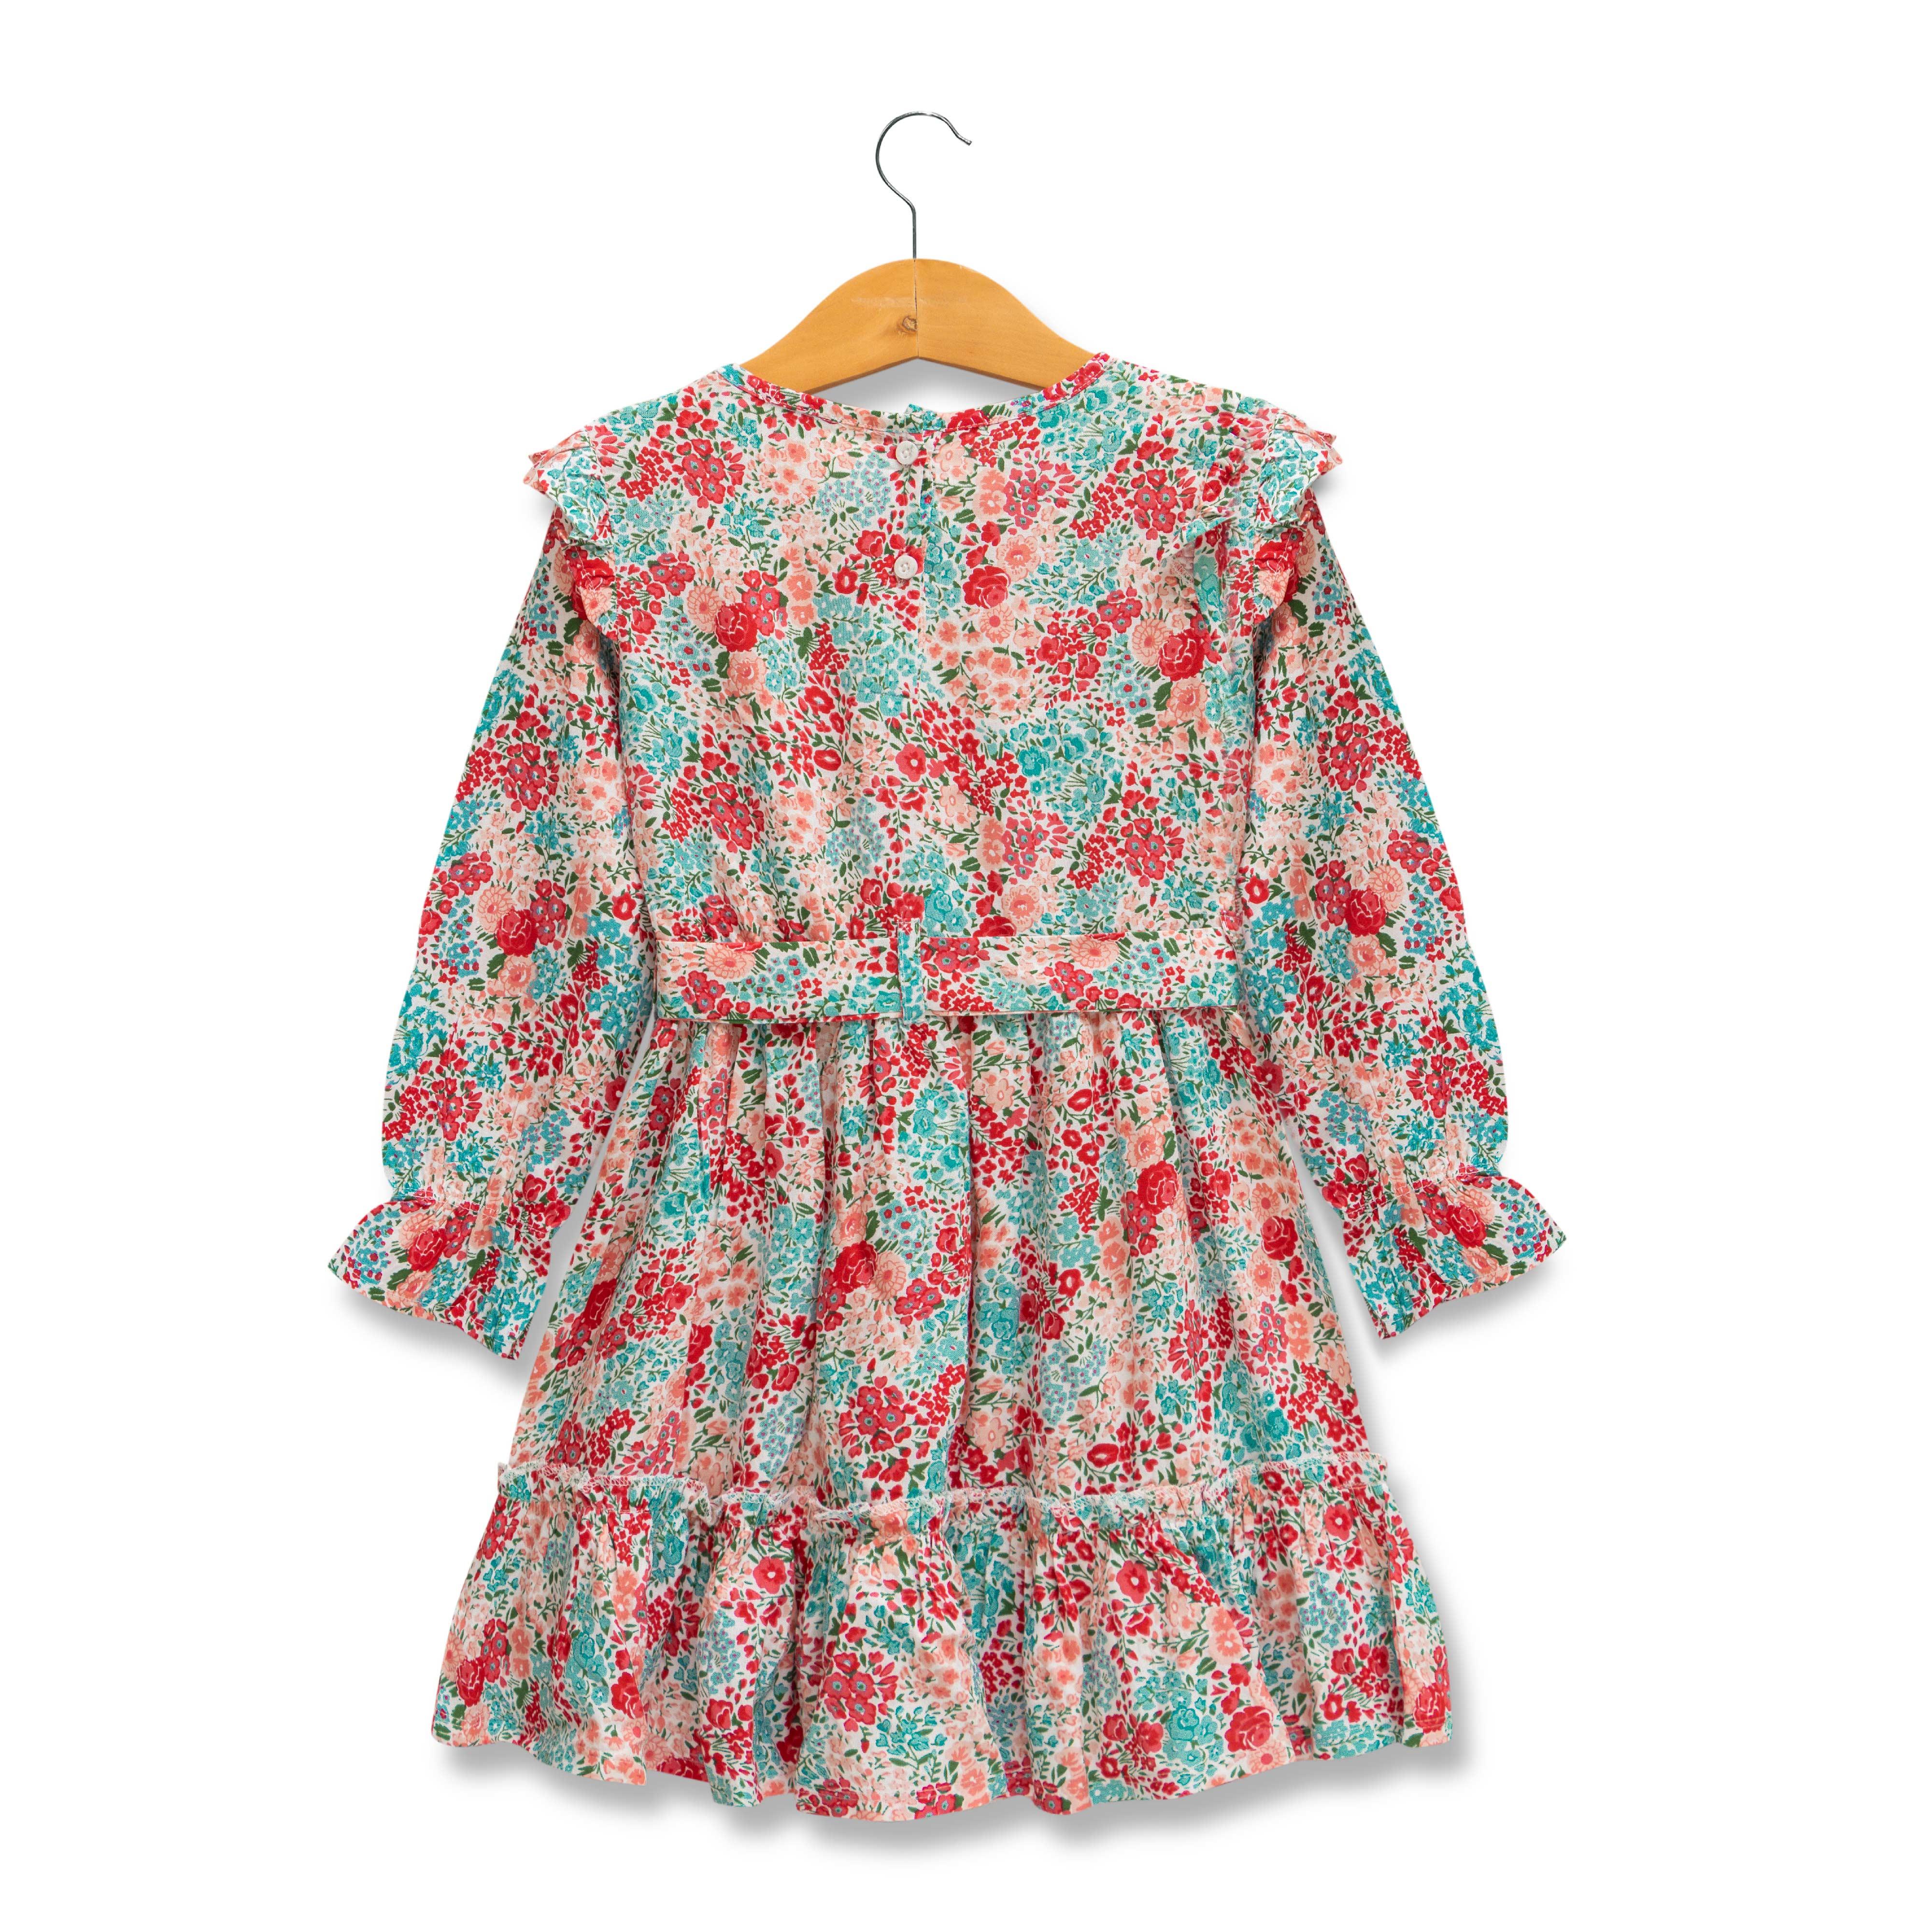 Young Girls All Over Printed Fit & Flare Dress